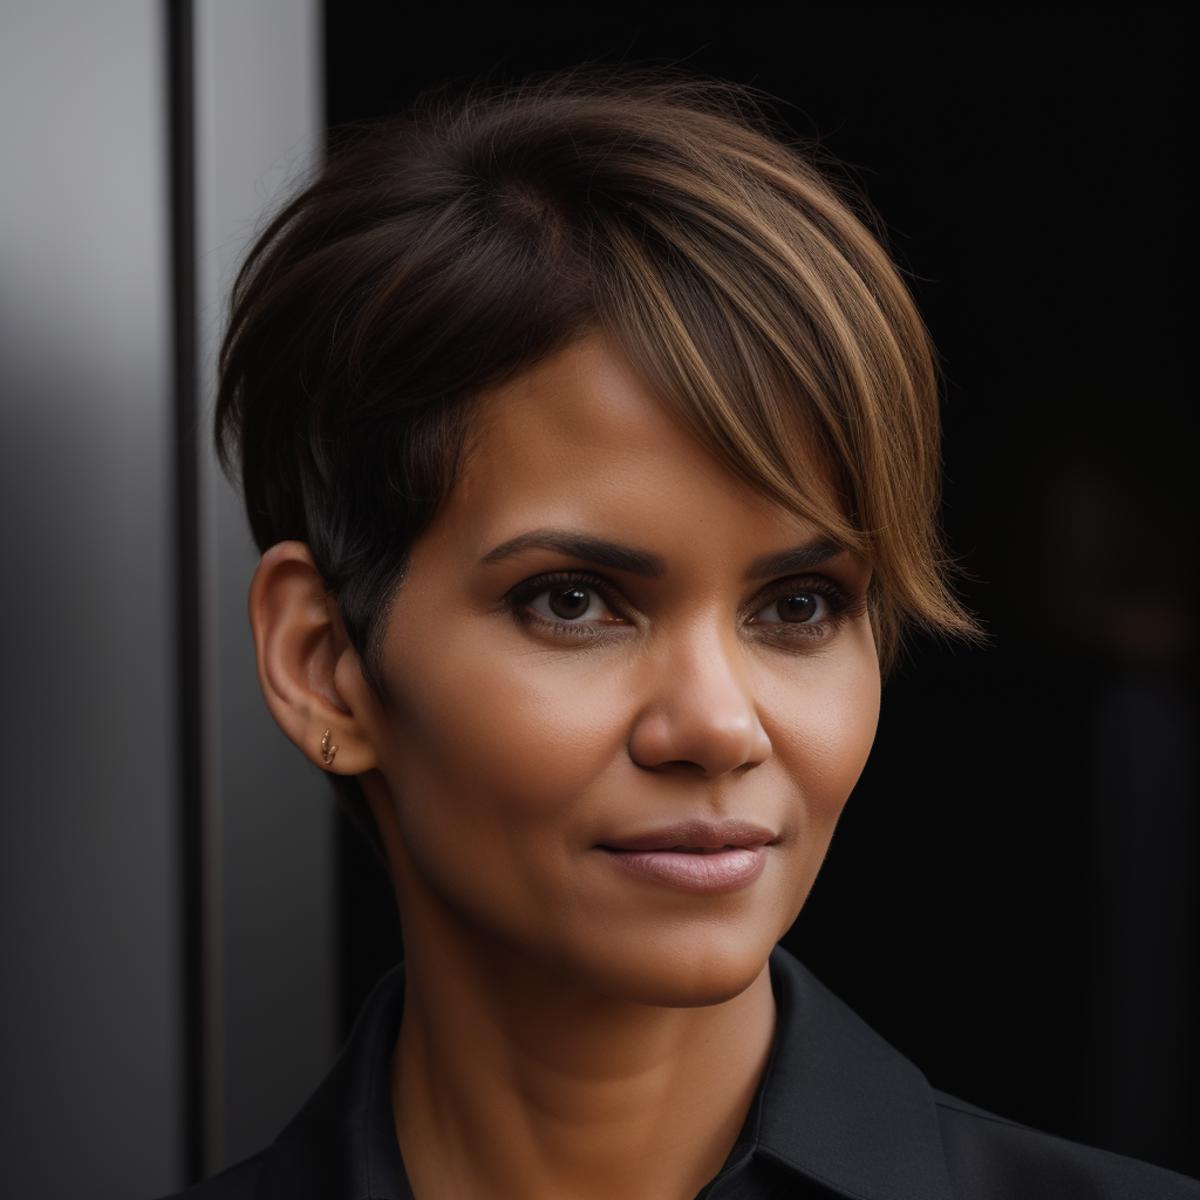 Halle Berry image by infamous__fish